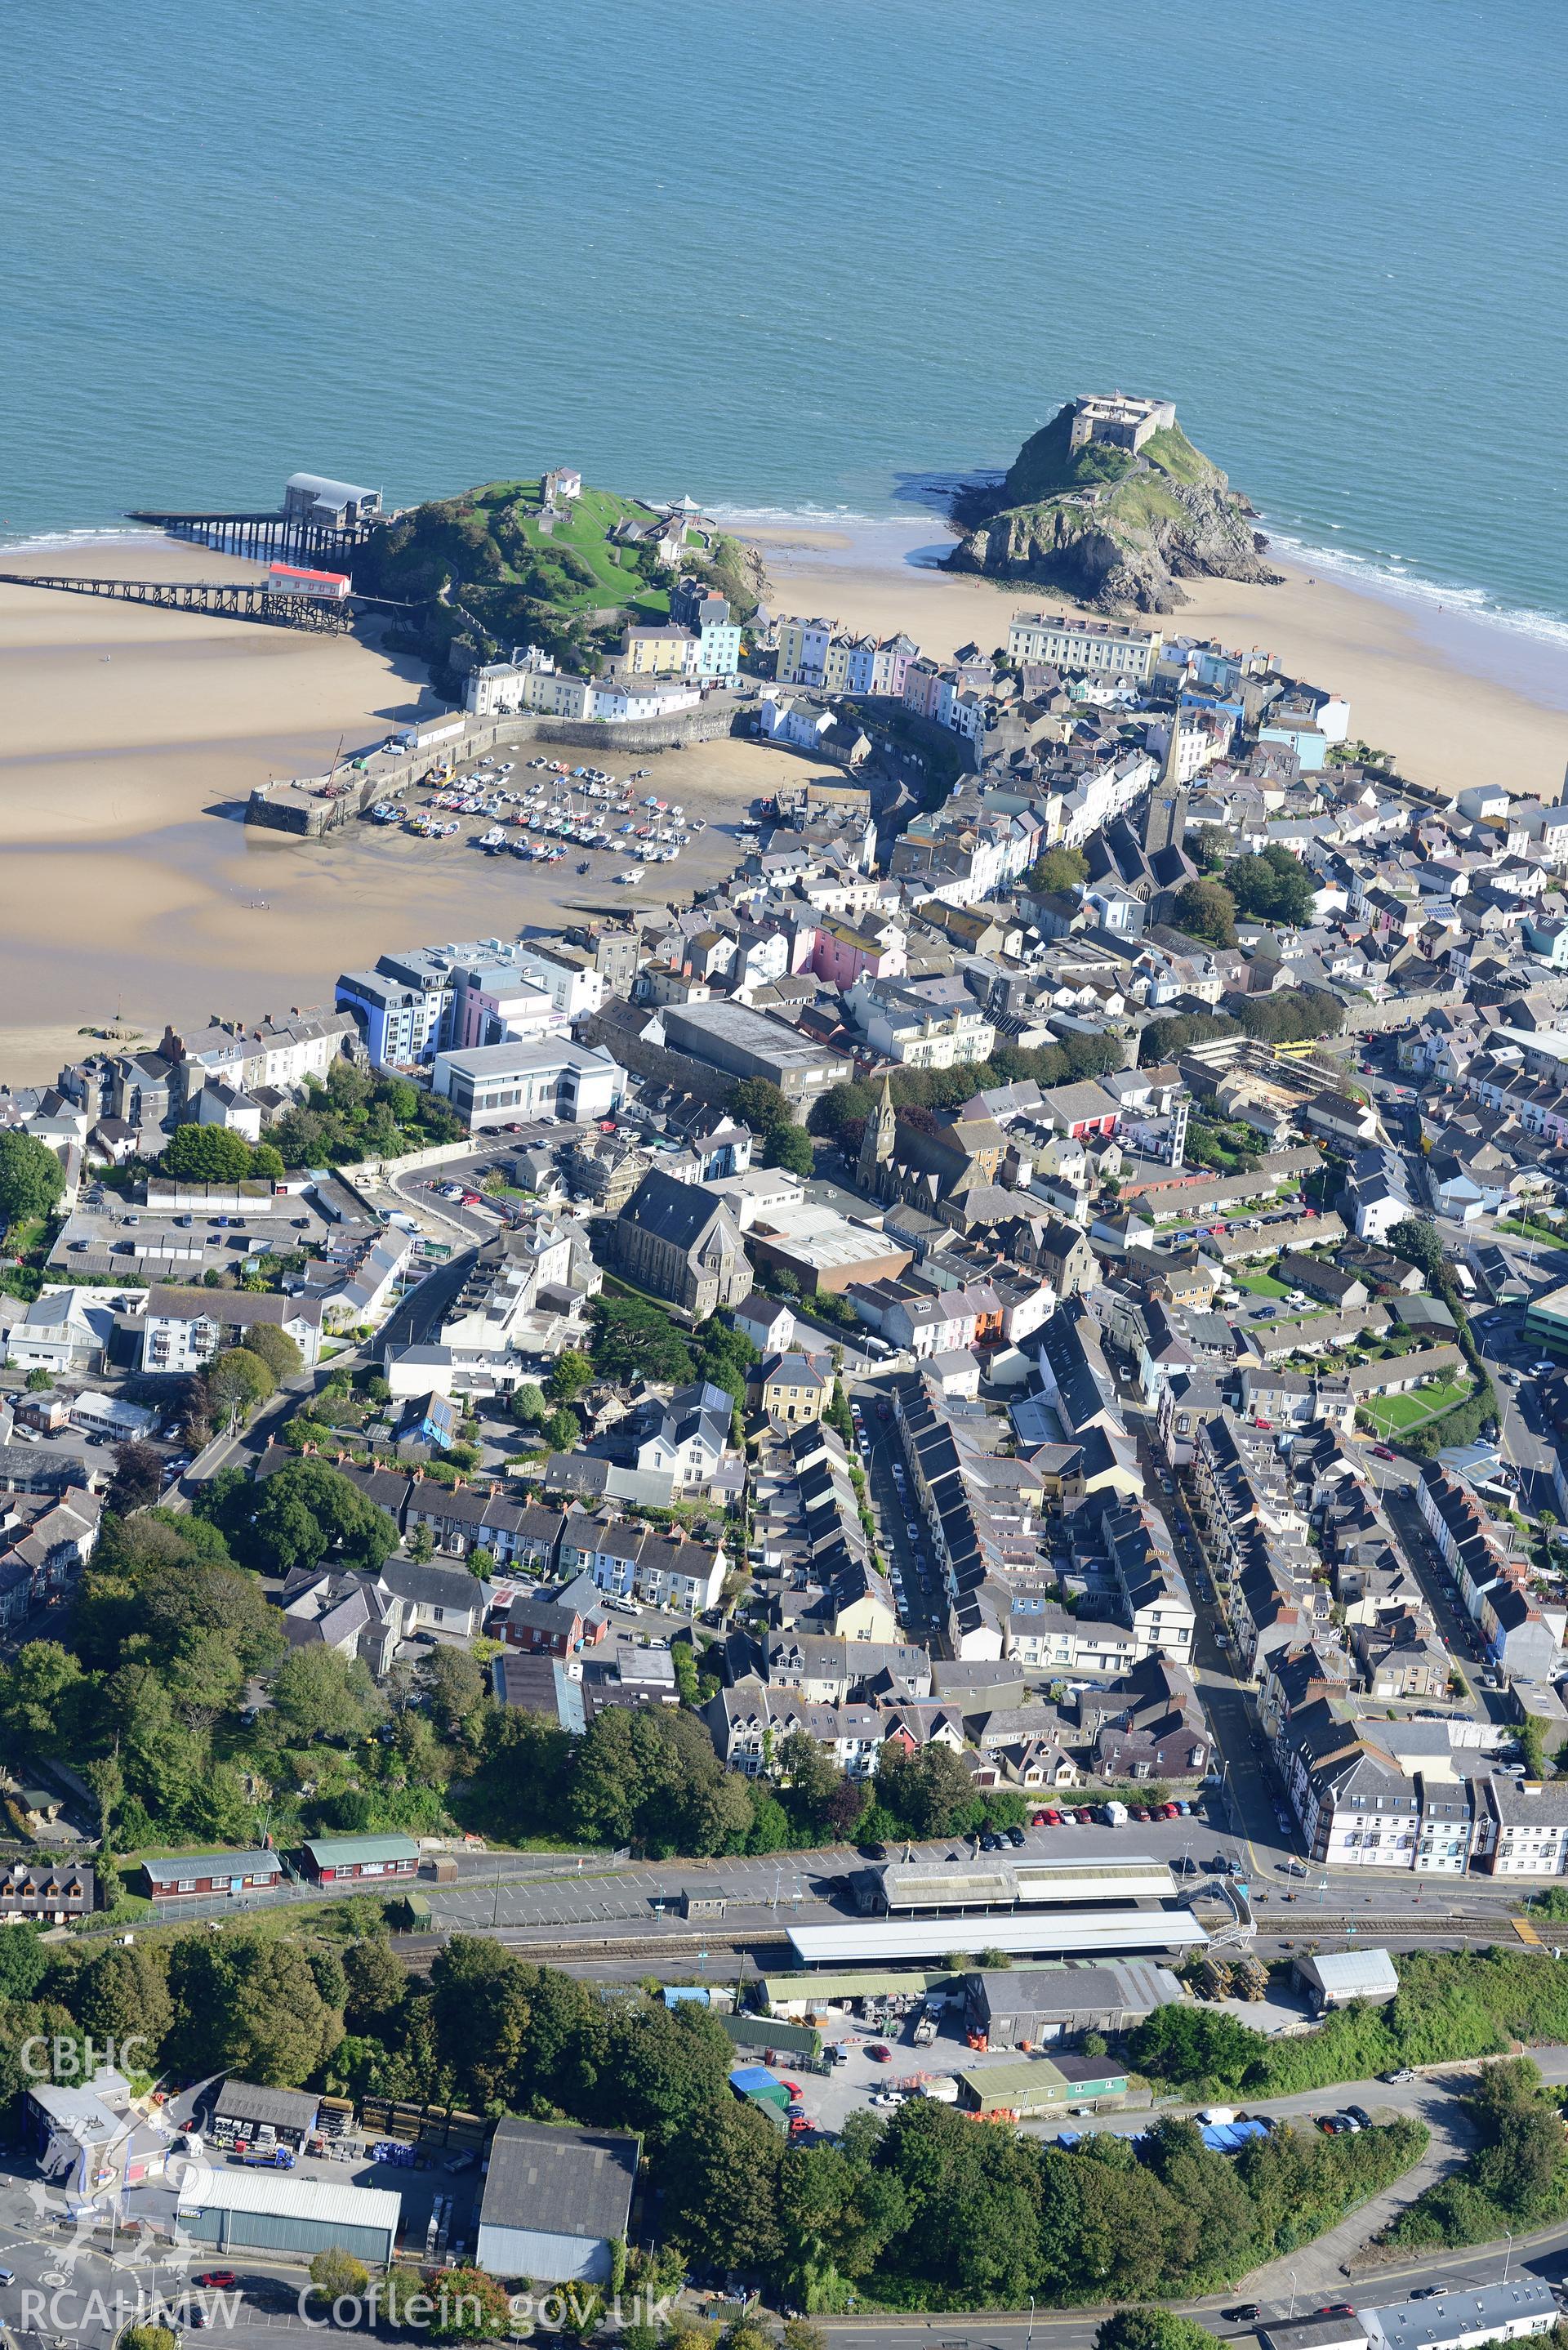 Old and new lifeboat station; lifeboat house; Royal Victoria Pier; St. Catherine's Island and St. Catherine's fort, Tenby. Oblique aerial photograph taken during RCAHMW's programme of archaeological aerial reconnaissance by Toby Driver on 30/09/2015.